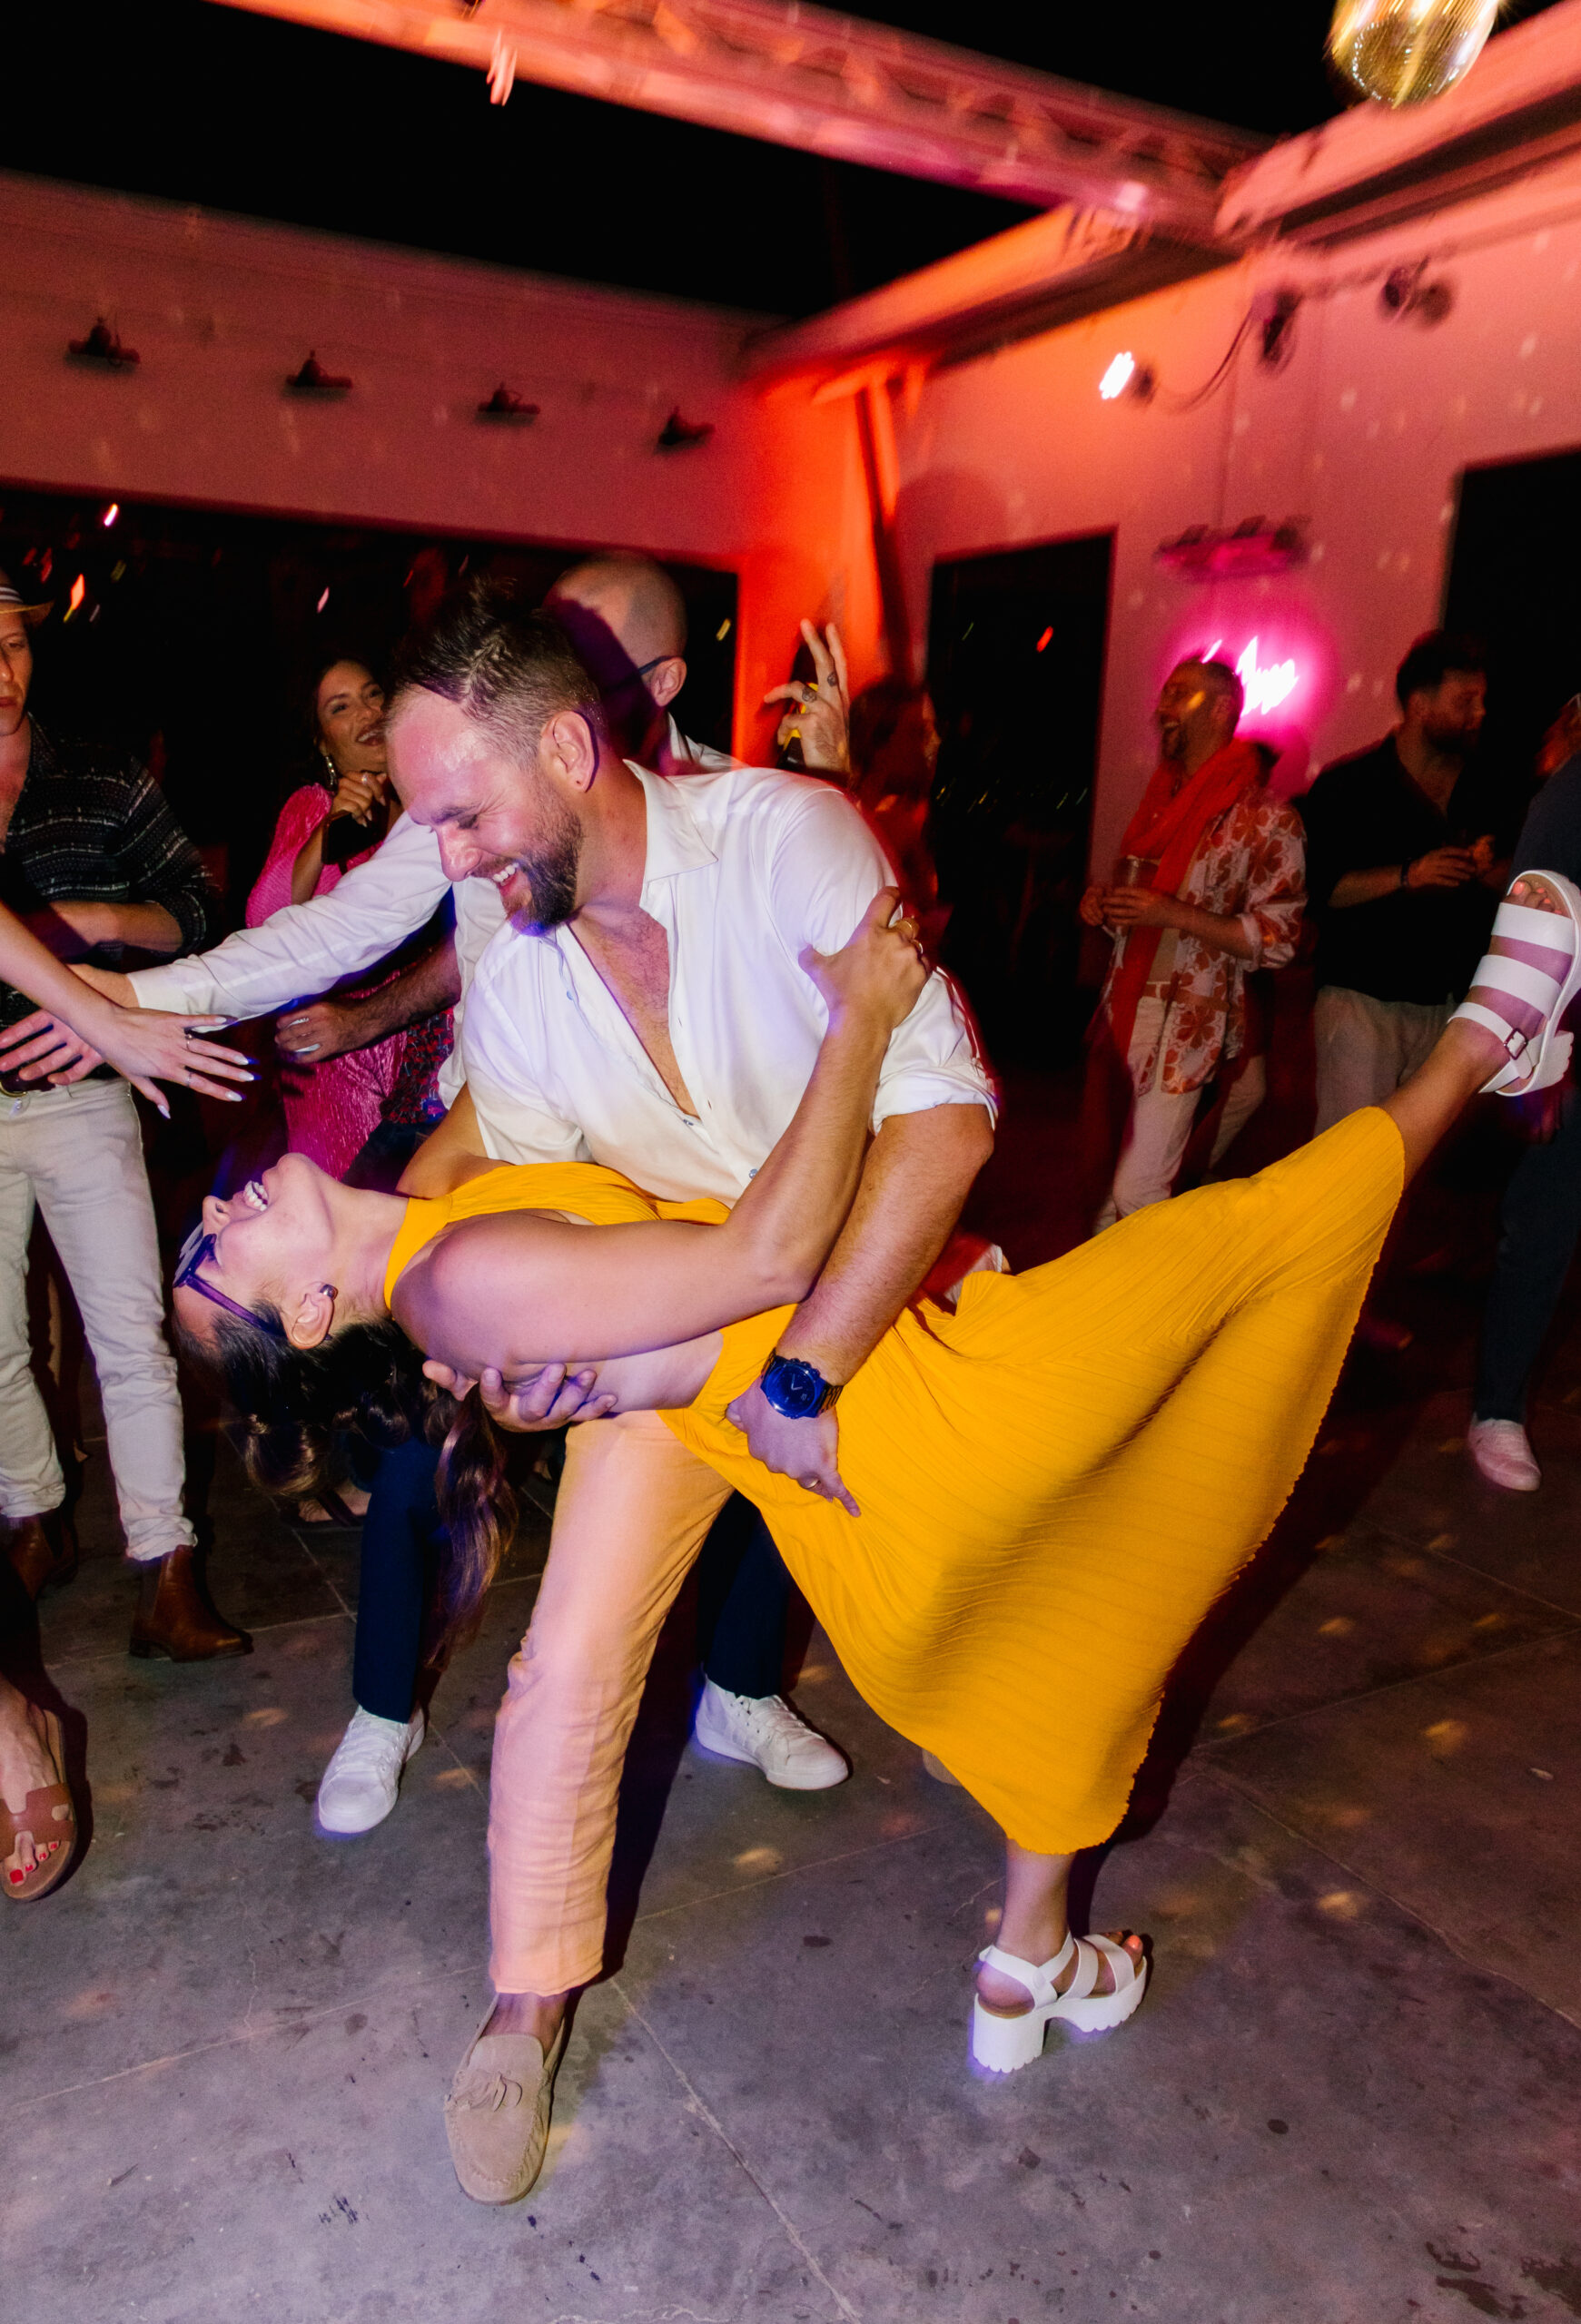 destination wedding mexico open air fuchsia lighting te amo neon sign bride and groom dip dance photo laughing candid wedding photo yellow after party dress